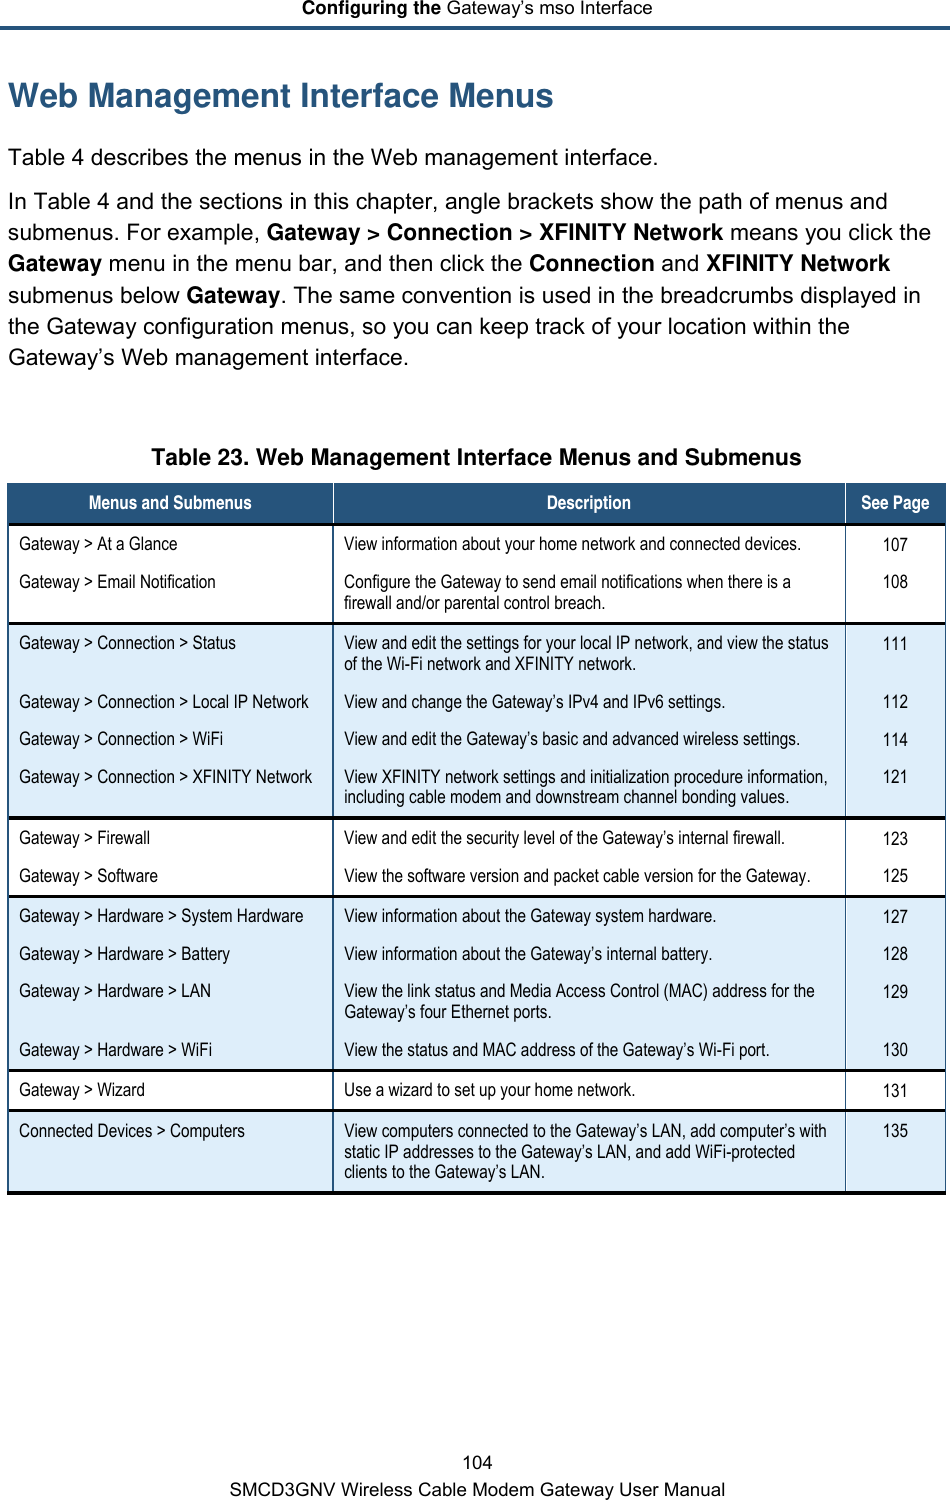 Configuring the Gateway’s mso Interface 104 SMCD3GNV Wireless Cable Modem Gateway User Manual Web Management Interface Menus Table 4 describes the menus in the Web management interface.  In Table 4 and the sections in this chapter, angle brackets show the path of menus and submenus. For example, Gateway &gt; Connection &gt; XFINITY Network means you click the Gateway menu in the menu bar, and then click the Connection and XFINITY Network submenus below Gateway. The same convention is used in the breadcrumbs displayed in the Gateway configuration menus, so you can keep track of your location within the Gateway’s Web management interface.  Table 23. Web Management Interface Menus and Submenus Menus and Submenus Description See Page Gateway &gt; At a Glance  View information about your home network and connected devices.  107 Gateway &gt; Email Notification Configure the Gateway to send email notifications when there is a firewall and/or parental control breach. 108 Gateway &gt; Connection &gt; Status View and edit the settings for your local IP network, and view the status of the Wi-Fi network and XFINITY network. 111 Gateway &gt; Connection &gt; Local IP Network View and change the Gateway’s IPv4 and IPv6 settings. 112 Gateway &gt; Connection &gt; WiFi View and edit the Gateway’s basic and advanced wireless settings. 114 Gateway &gt; Connection &gt; XFINITY Network View XFINITY network settings and initialization procedure information, including cable modem and downstream channel bonding values. 121 Gateway &gt; Firewall View and edit the security level of the Gateway’s internal firewall. 123 Gateway &gt; Software  View the software version and packet cable version for the Gateway.  125 Gateway &gt; Hardware &gt; System Hardware View information about the Gateway system hardware. 127 Gateway &gt; Hardware &gt; Battery View information about the Gateway’s internal battery. 128 Gateway &gt; Hardware &gt; LAN View the link status and Media Access Control (MAC) address for the Gateway’s four Ethernet ports. 129 Gateway &gt; Hardware &gt; WiFi View the status and MAC address of the Gateway’s Wi-Fi port. 130 Gateway &gt; Wizard Use a wizard to set up your home network. 131 Connected Devices &gt; Computers View computers connected to the Gateway’s LAN, add computer’s with static IP addresses to the Gateway’s LAN, and add WiFi-protected clients to the Gateway’s LAN. 135 